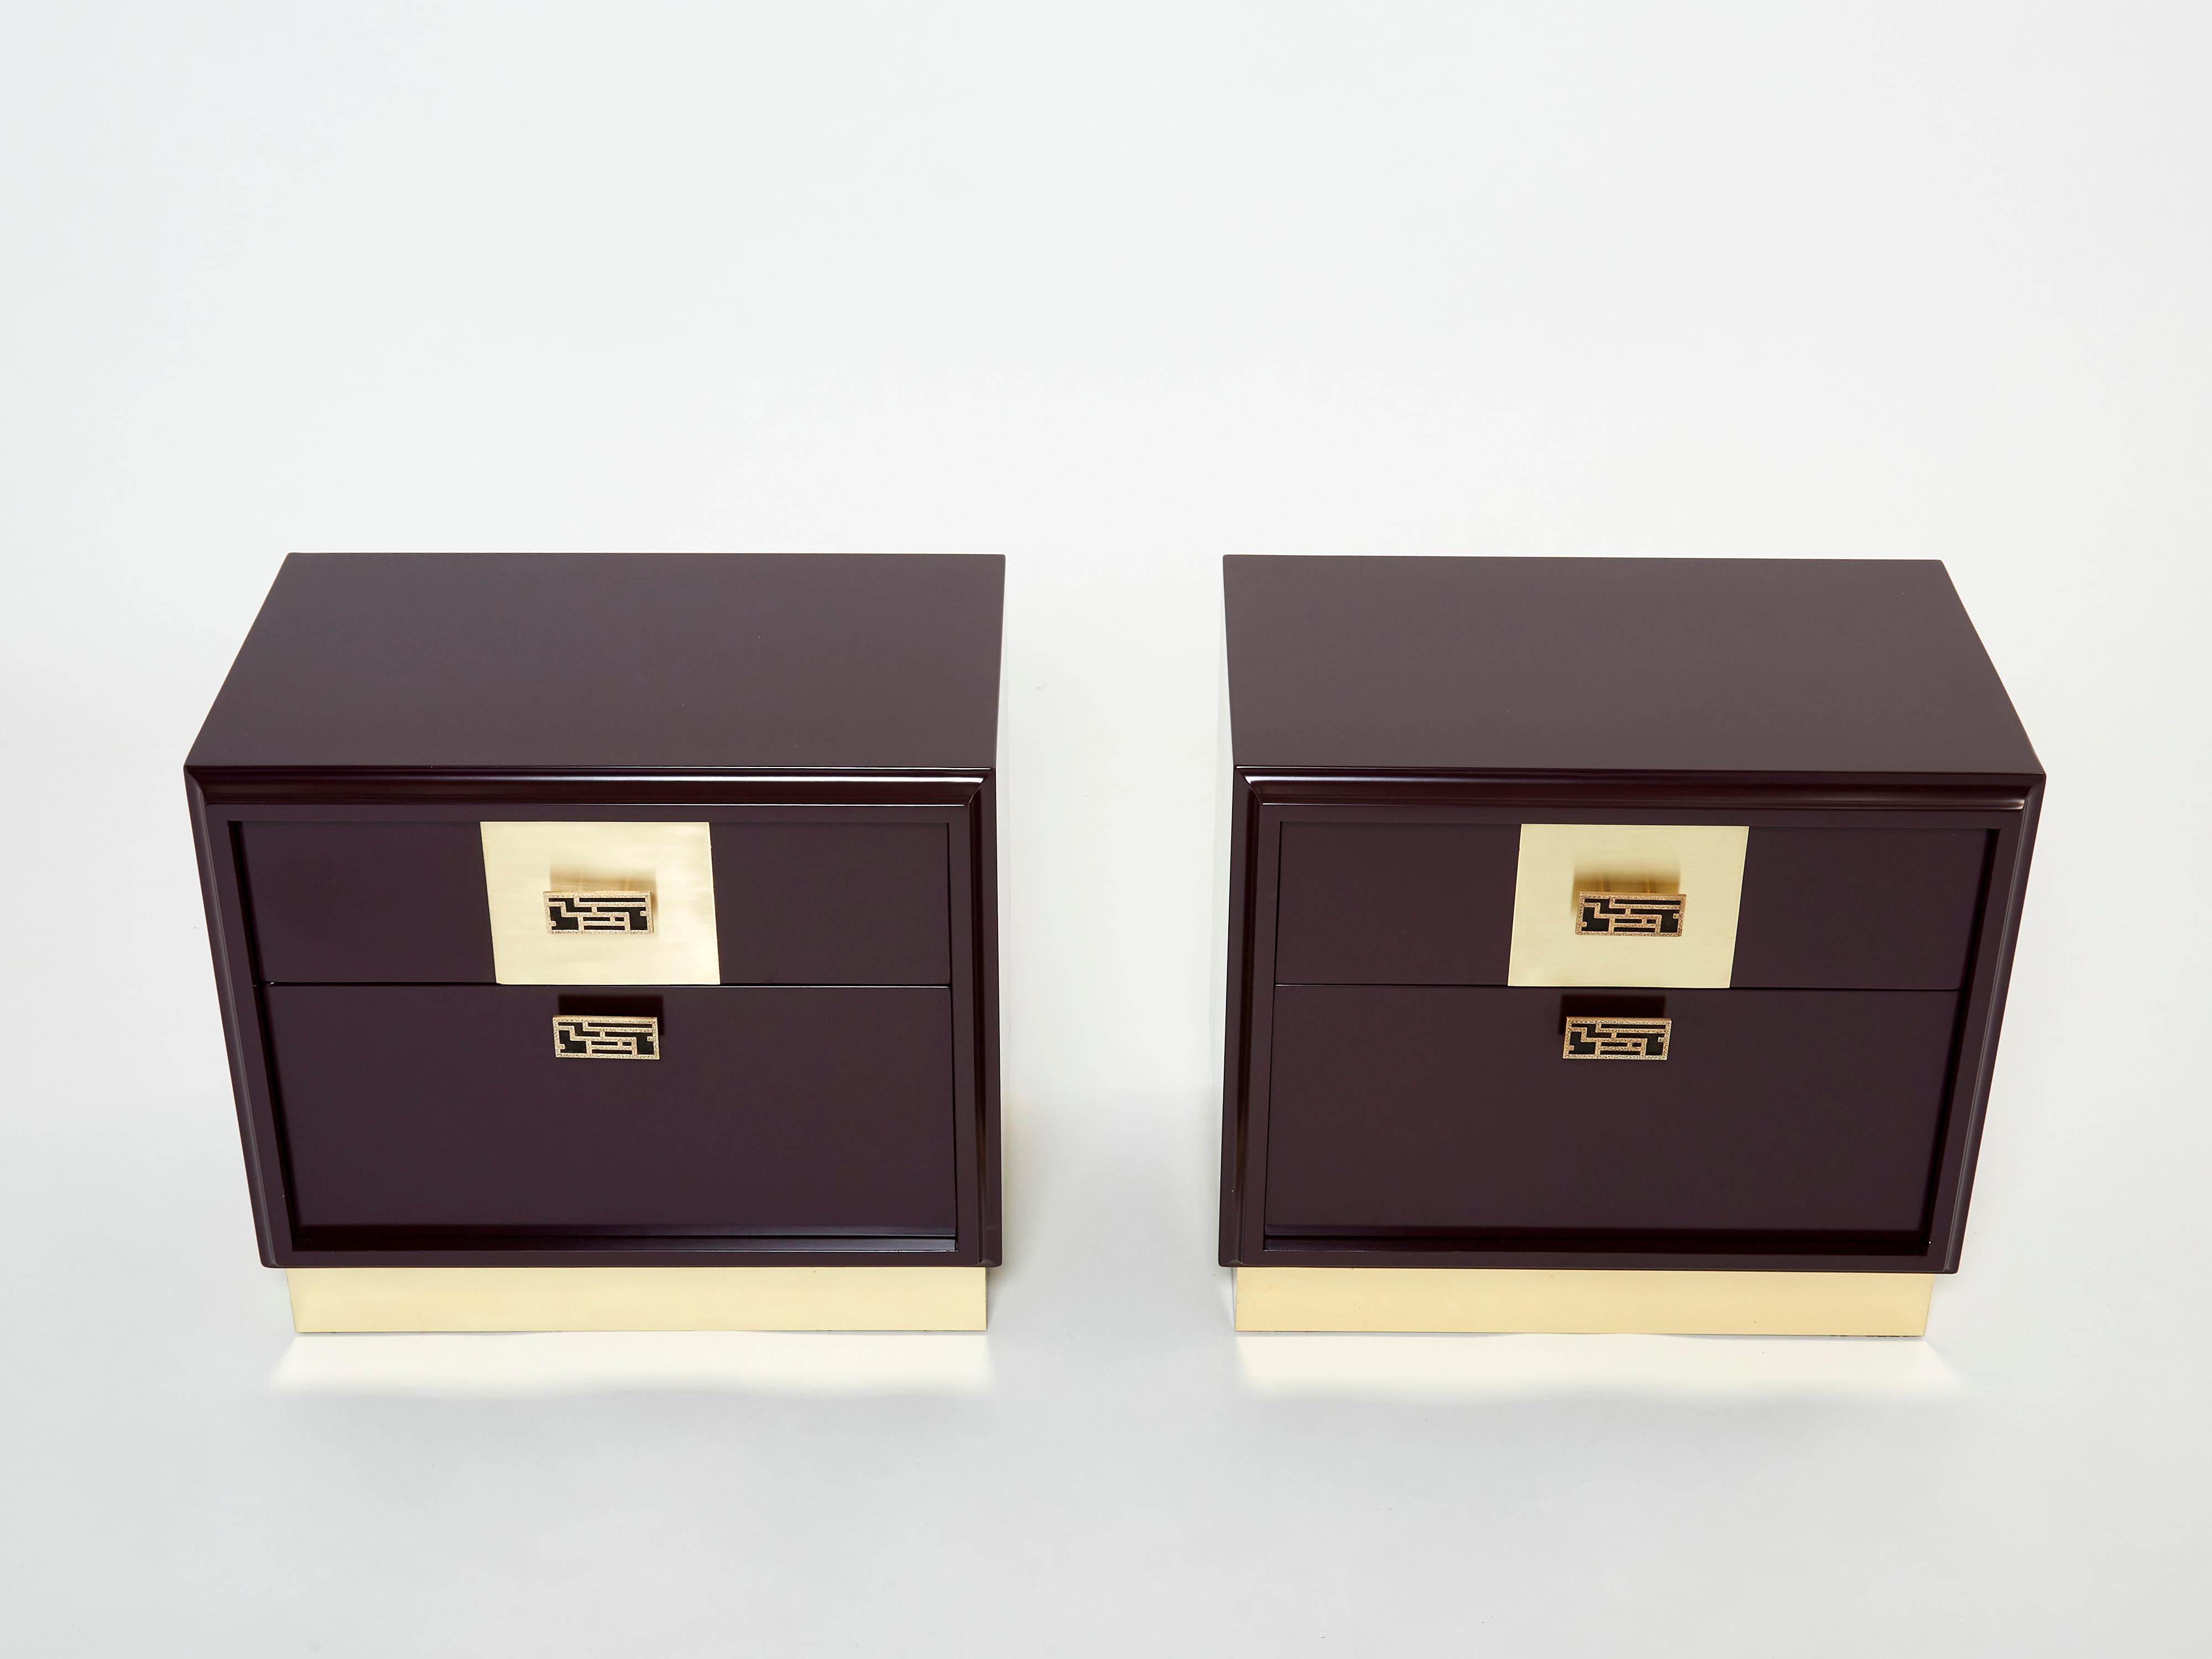 Late 20th Century Pair of Italian Luciano Frigerio Plum Lacquered Brass Nightstands Tables, 1970s For Sale